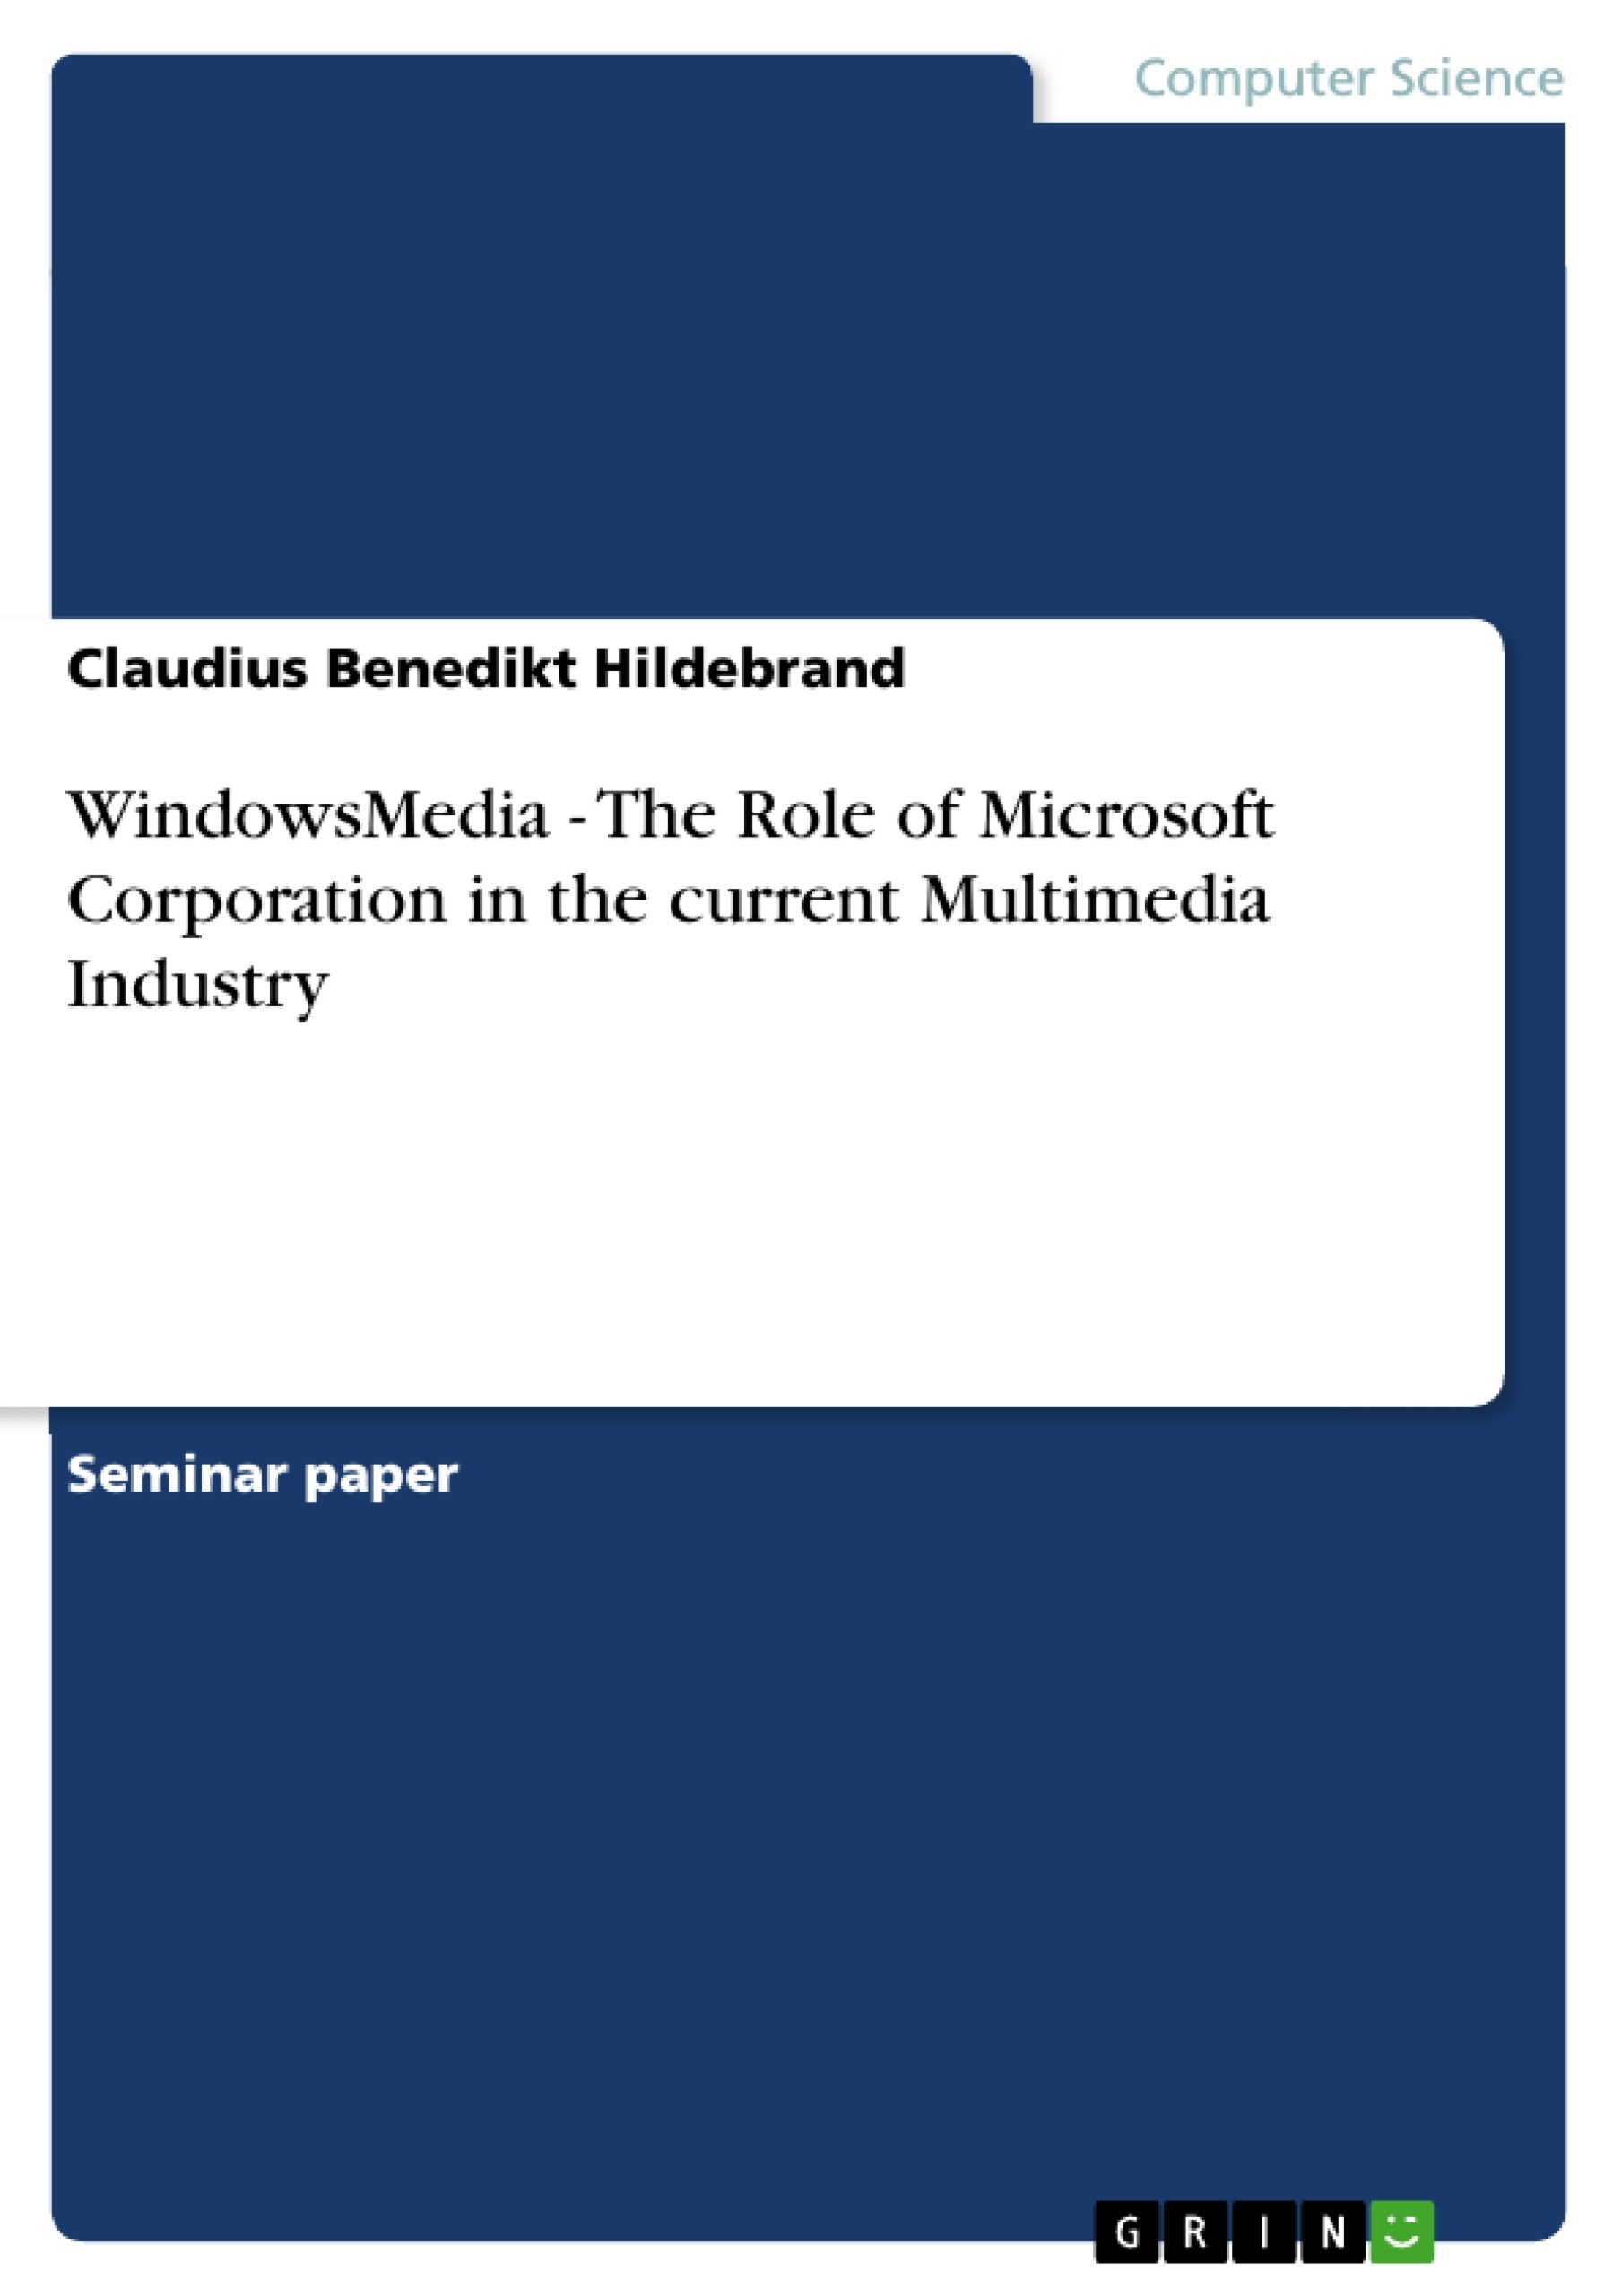 Titre: WindowsMedia - The Role of Microsoft Corporation in the current Multimedia Industry